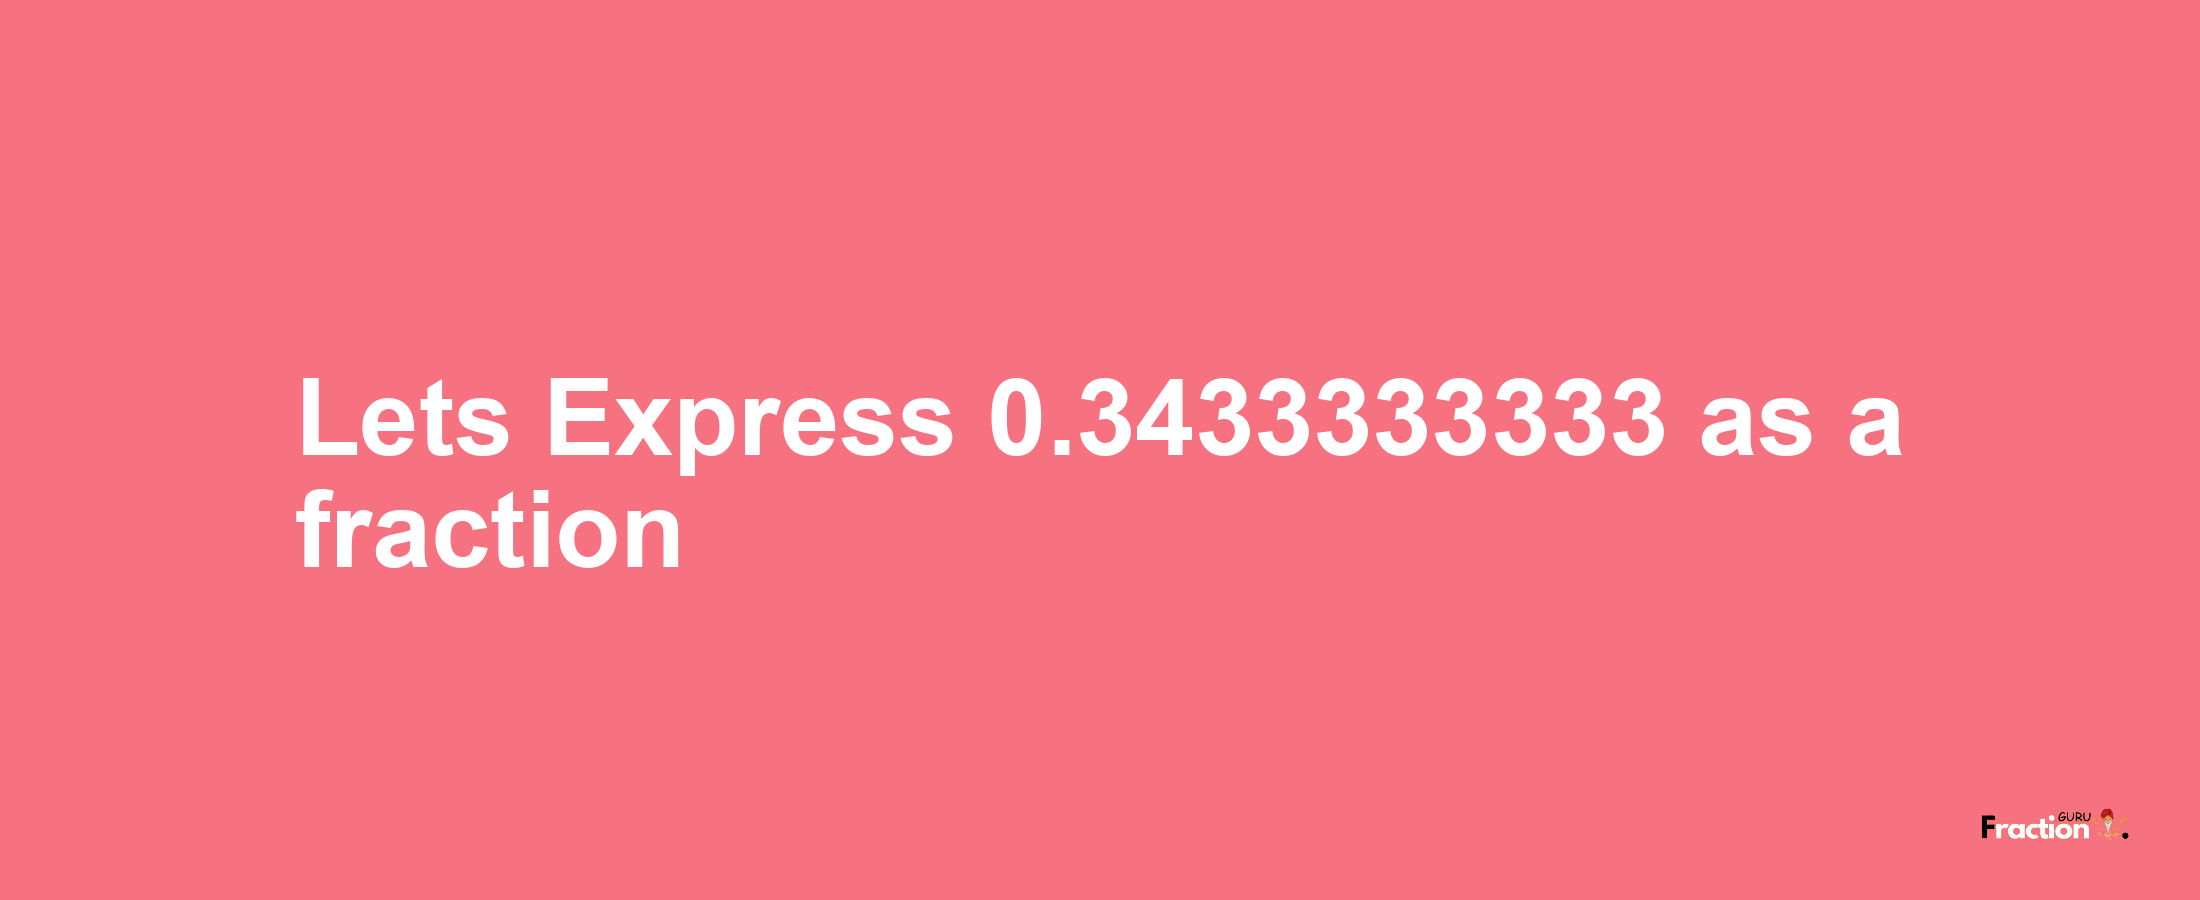 Lets Express 0.3433333333 as afraction